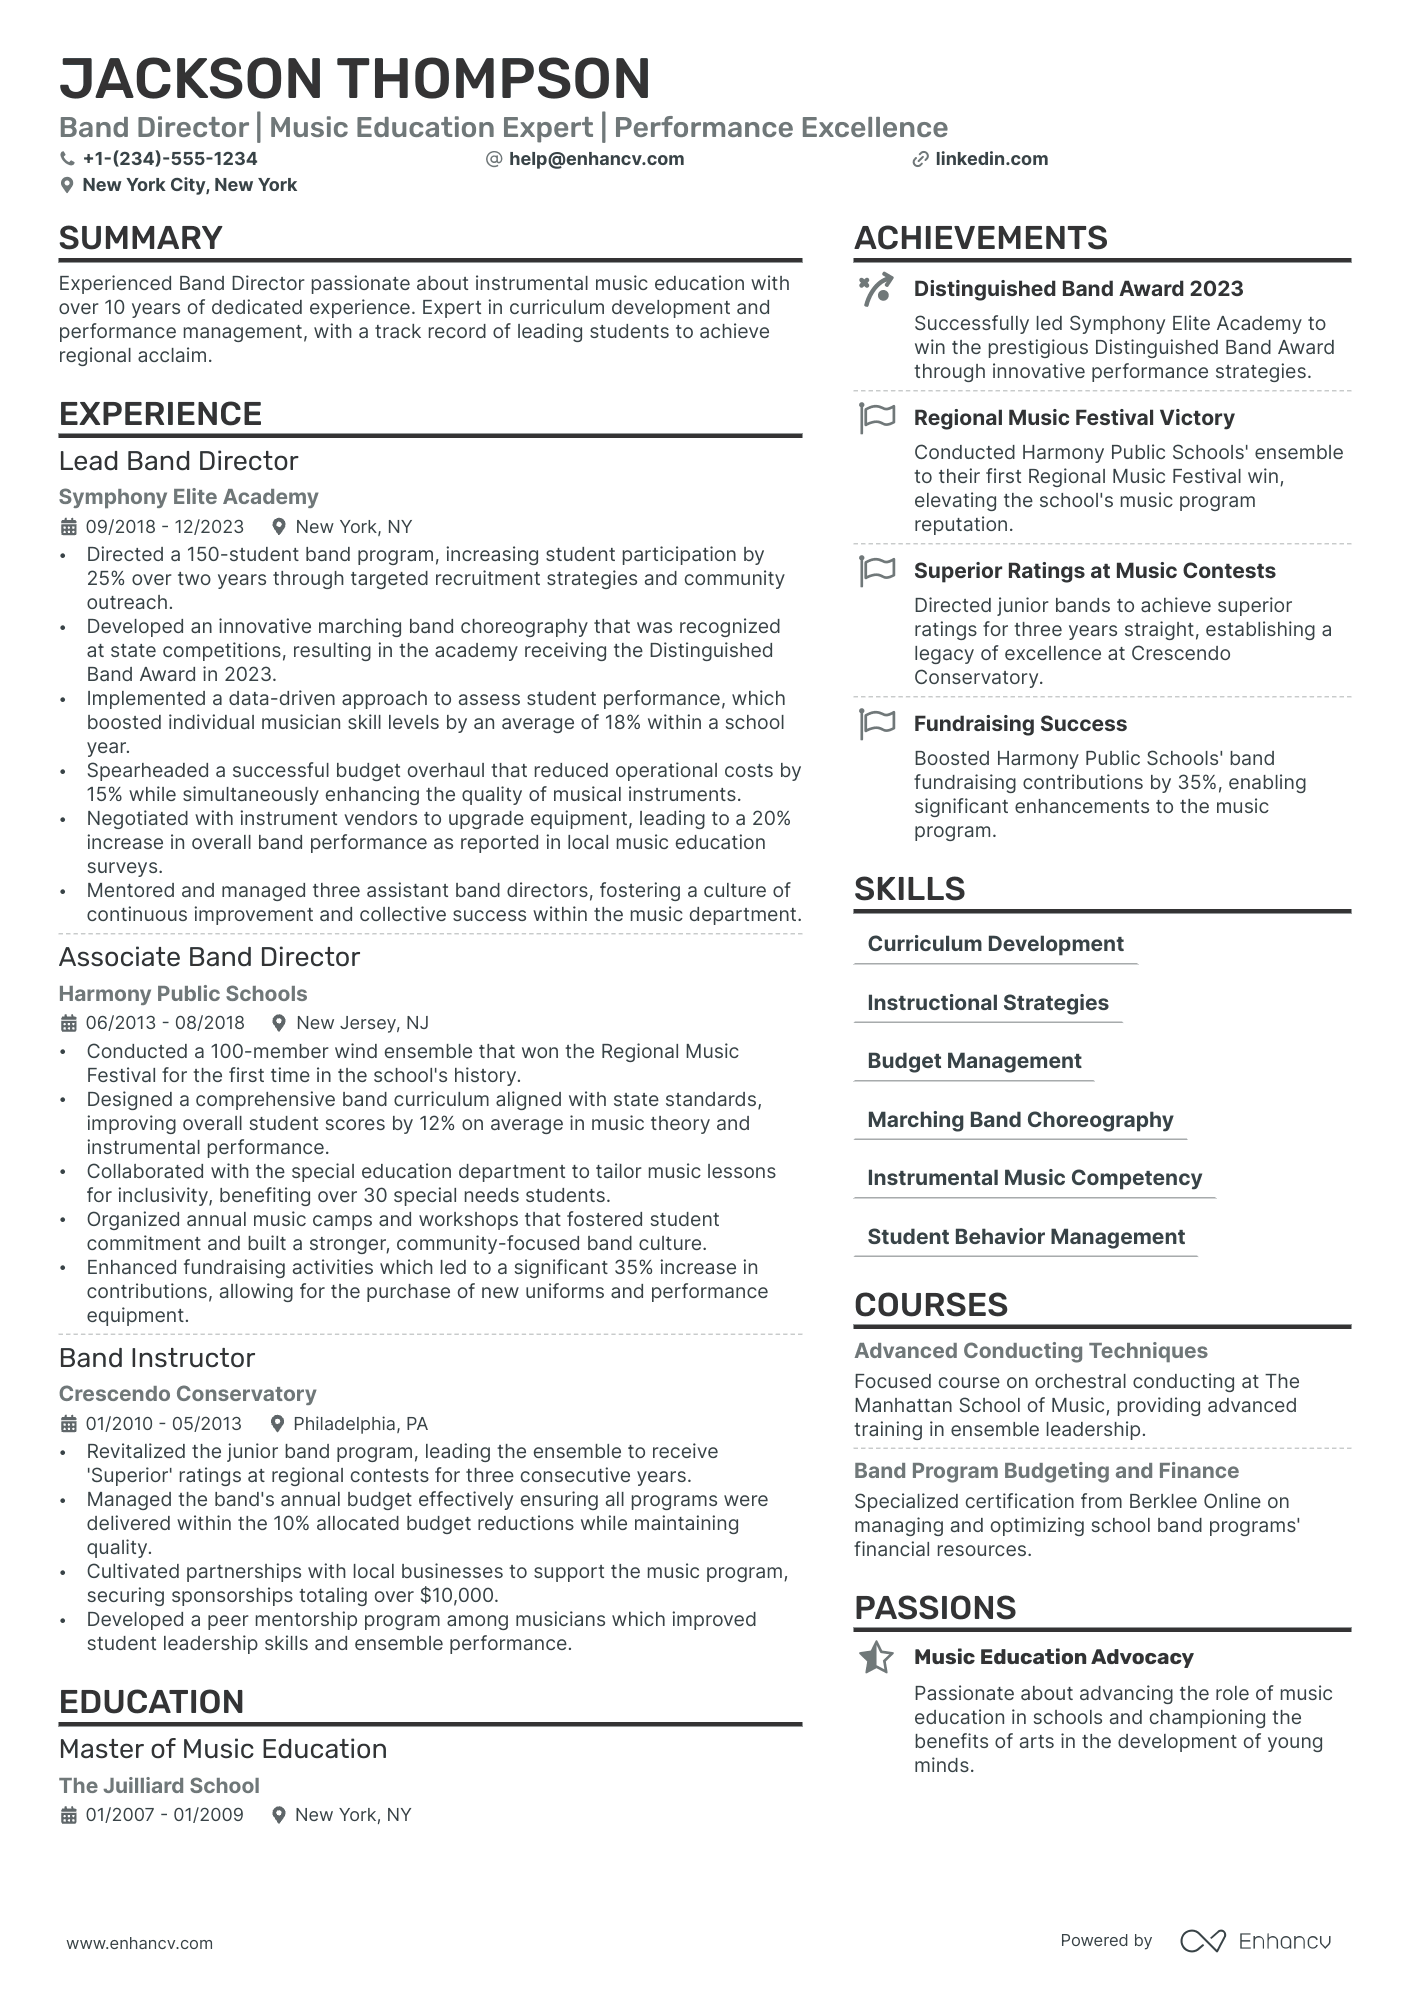 Band Director resume example